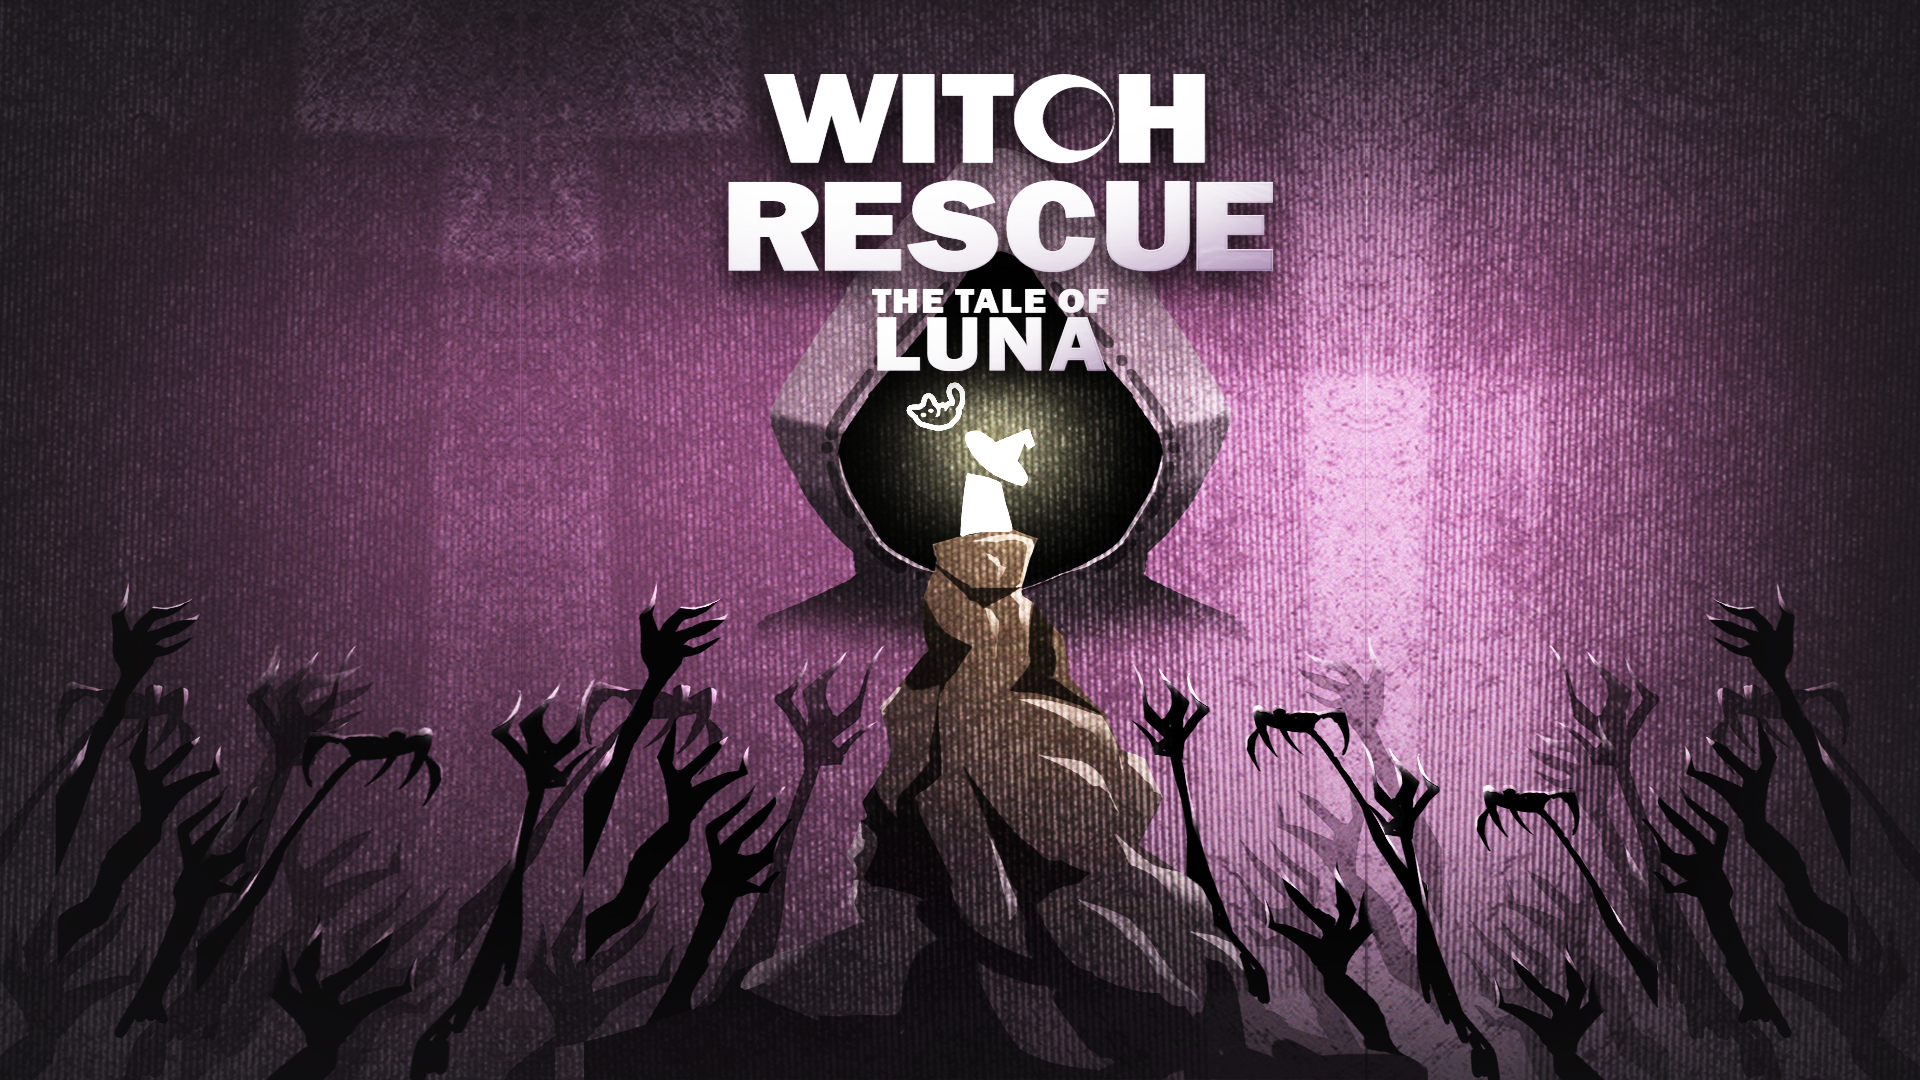 WITCH RESCUE THE TALES OF LUNA